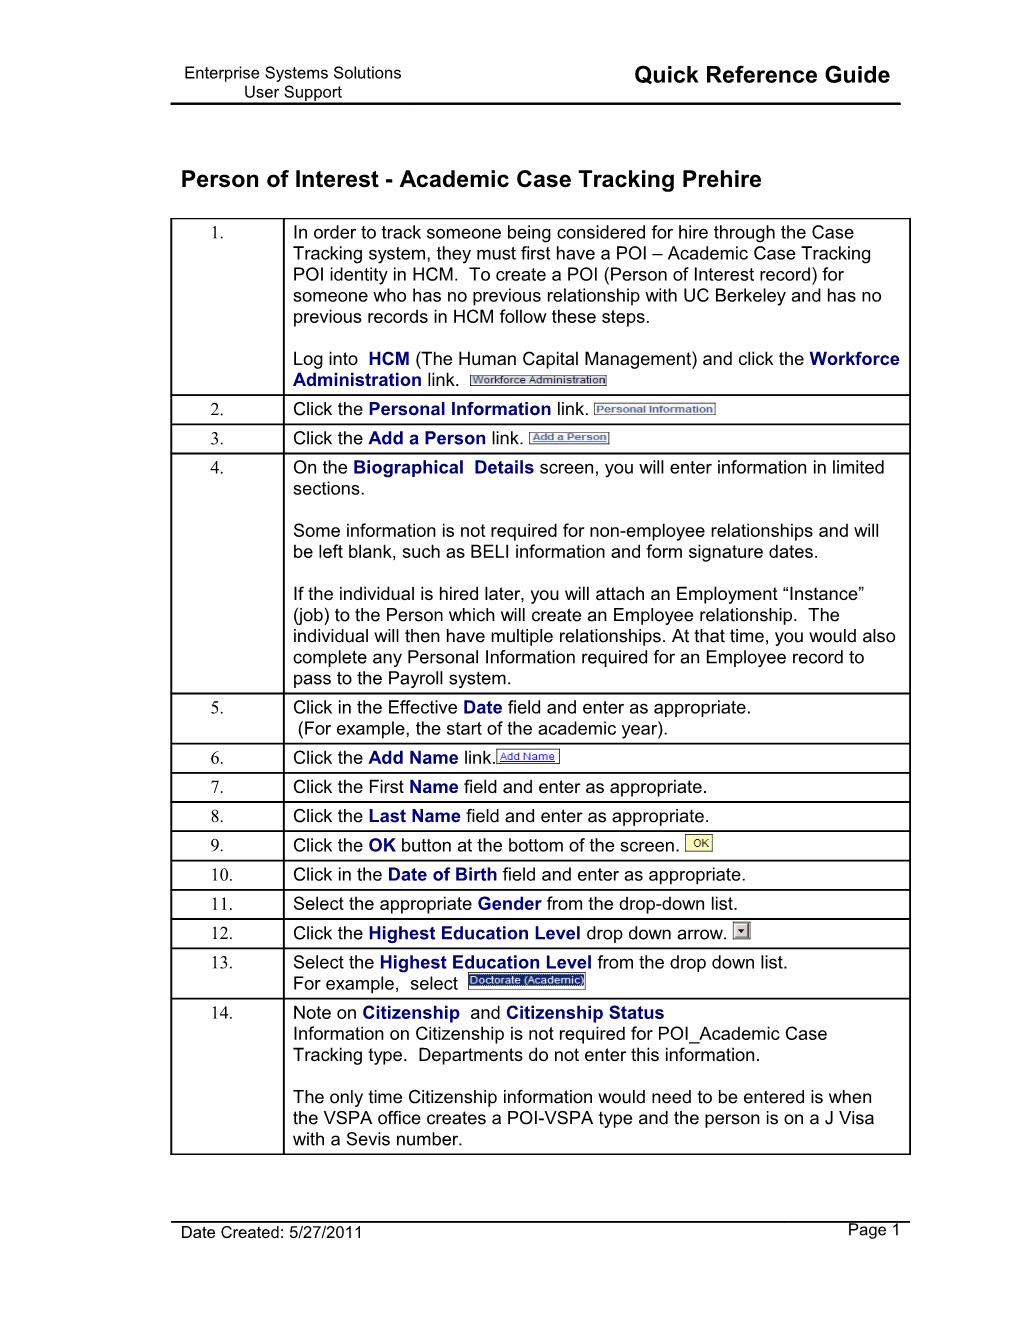 Person of Interest - Academic Case Tracking Prehire